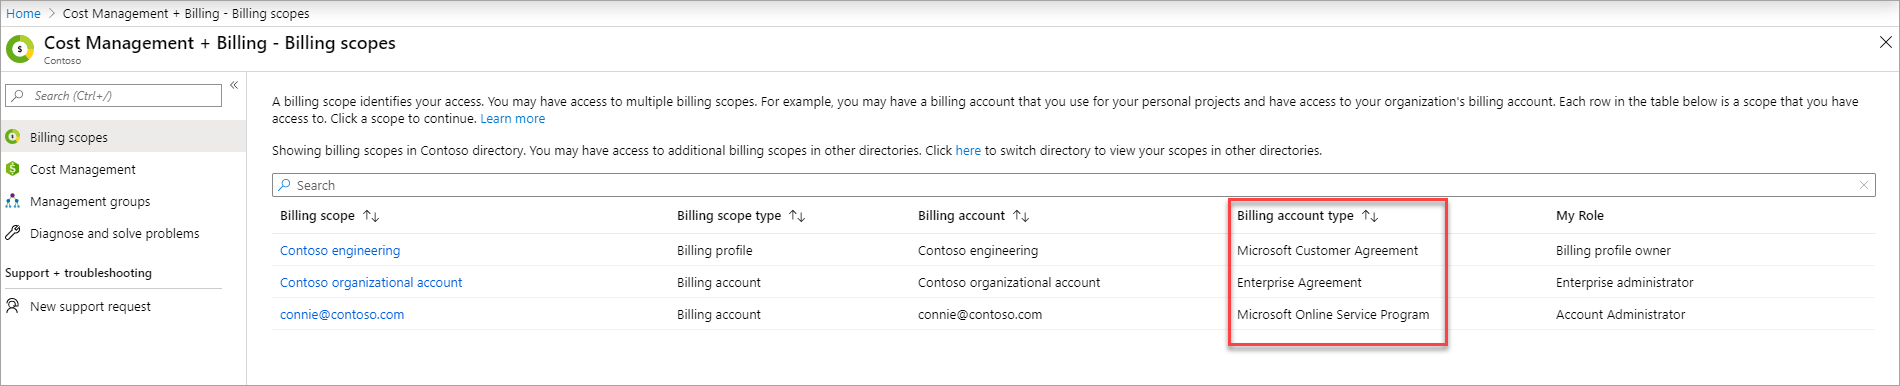 Screenshot that shows microsoft customer agreement in billing account list page.